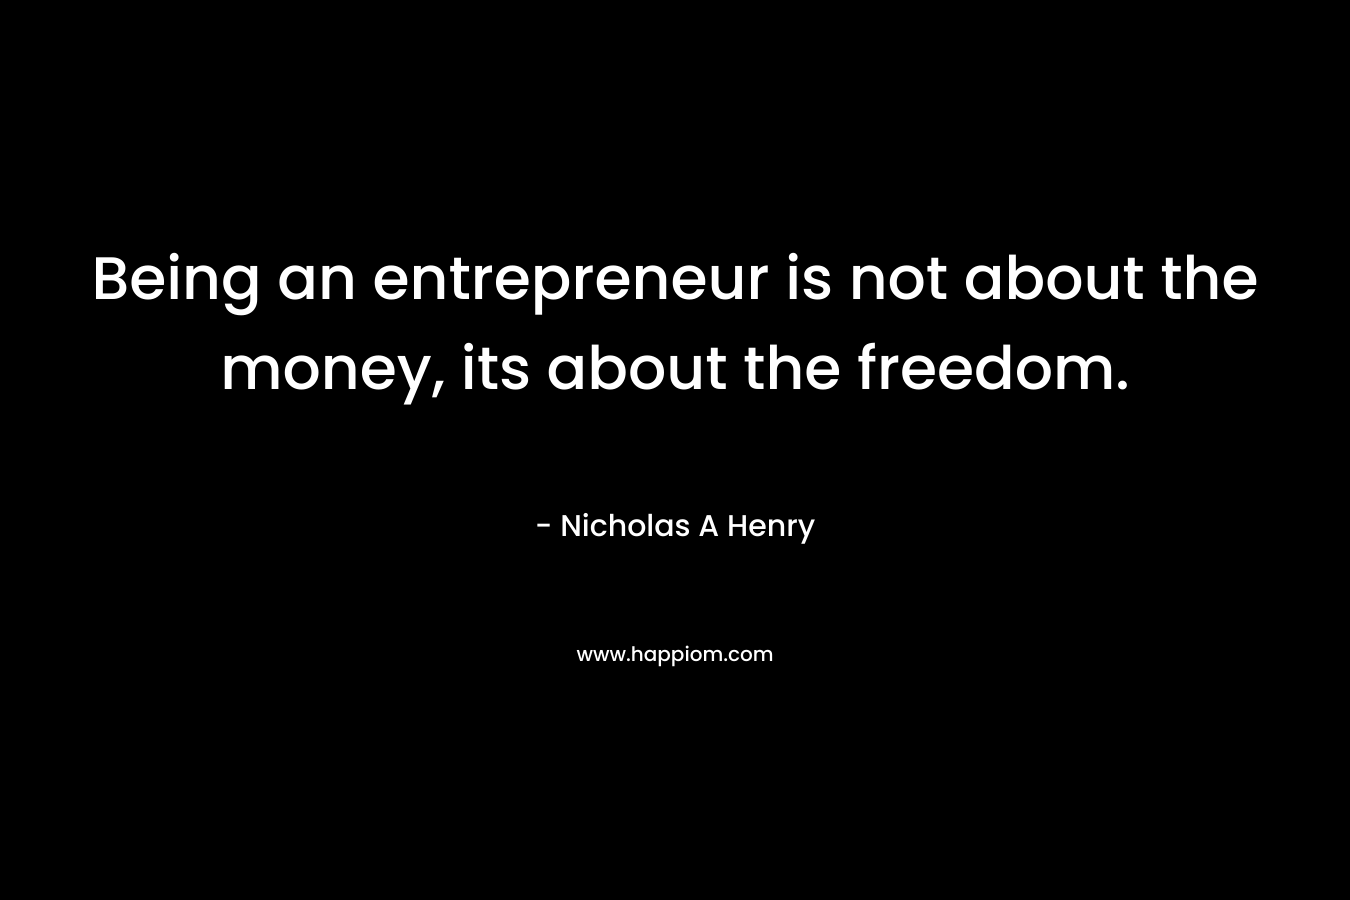 Being an entrepreneur is not about the money, its about the freedom.